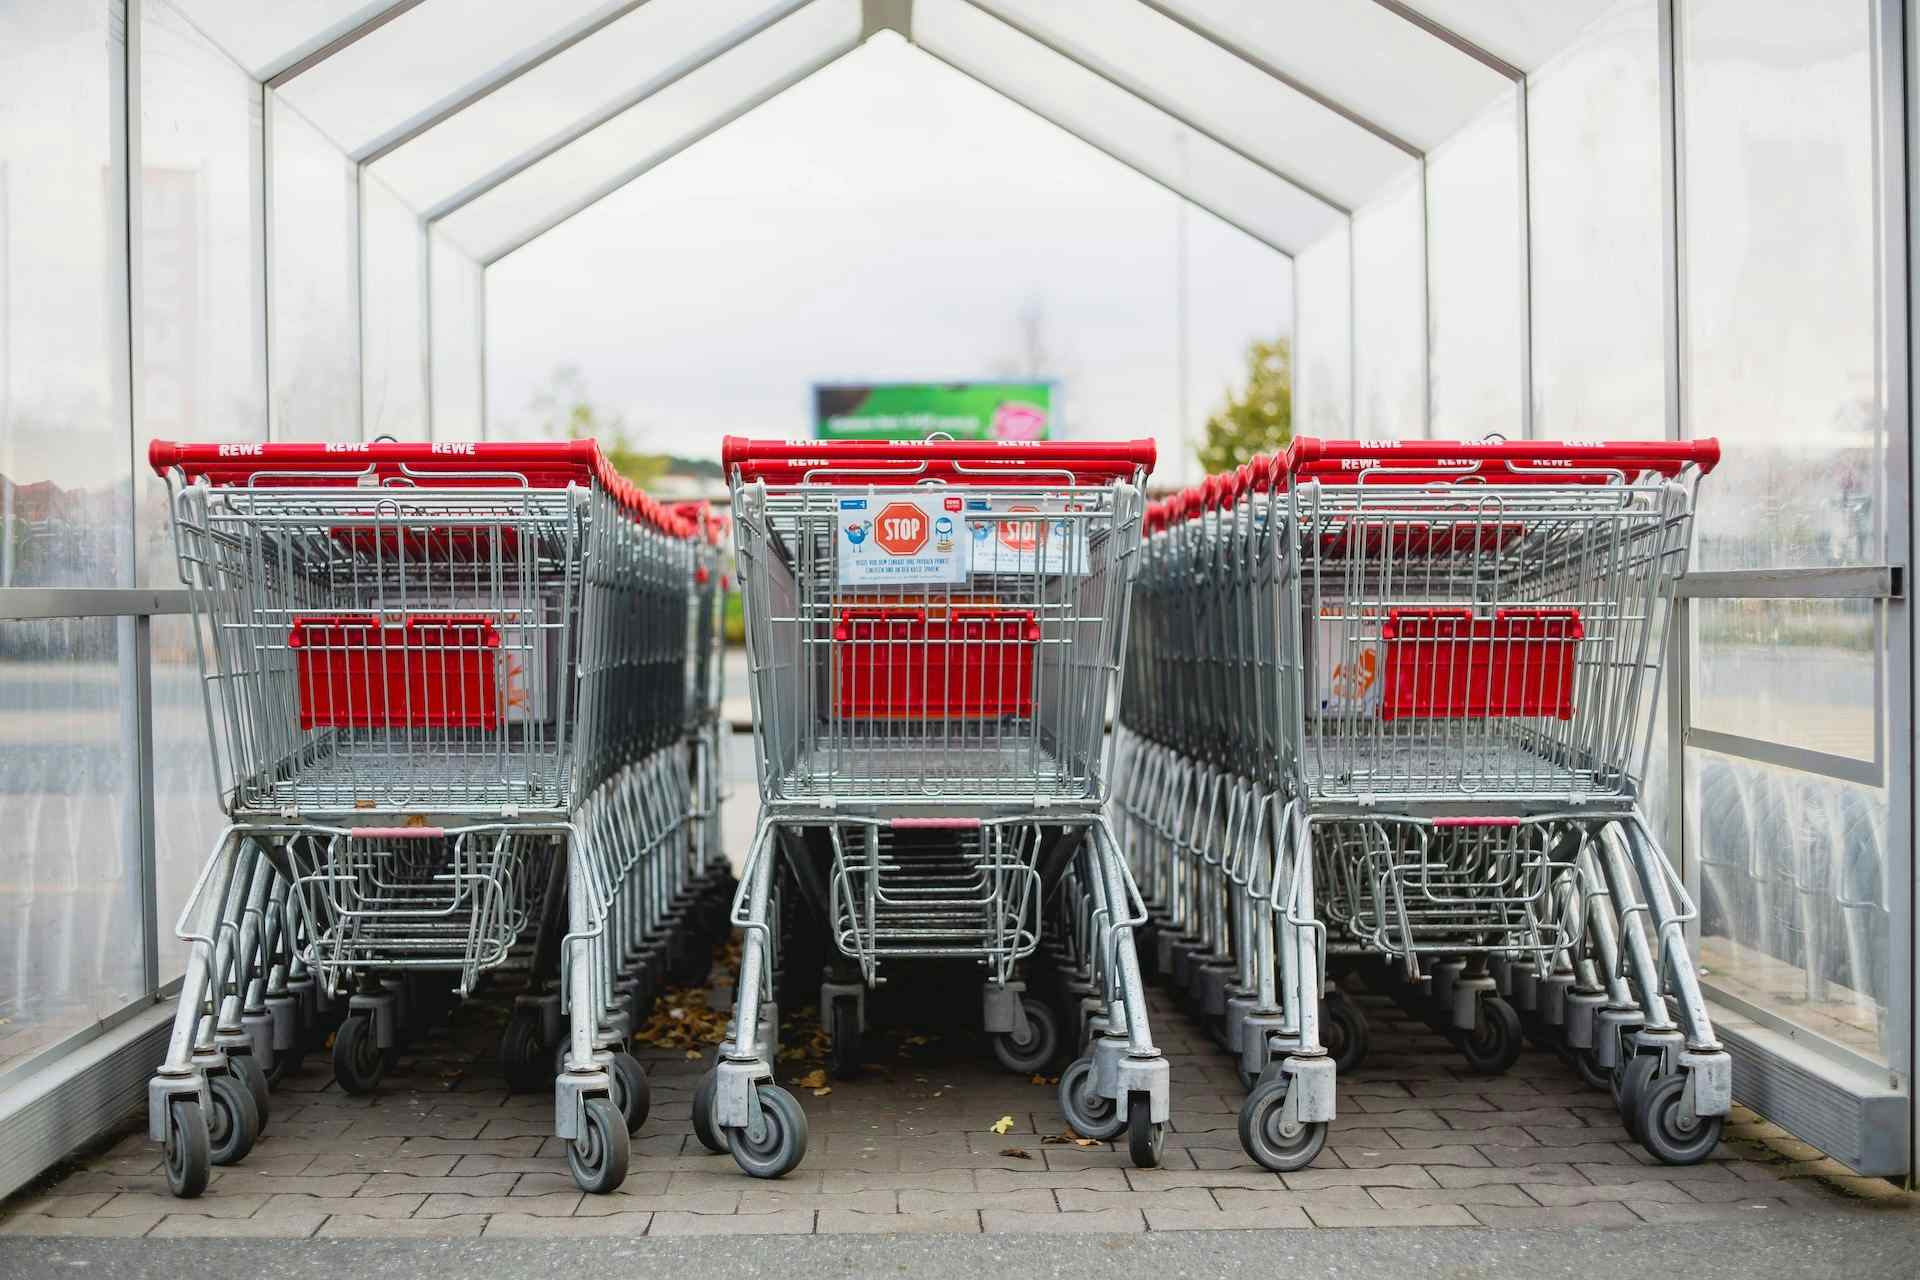 Shoppers urged not to panic buy in supermarkets